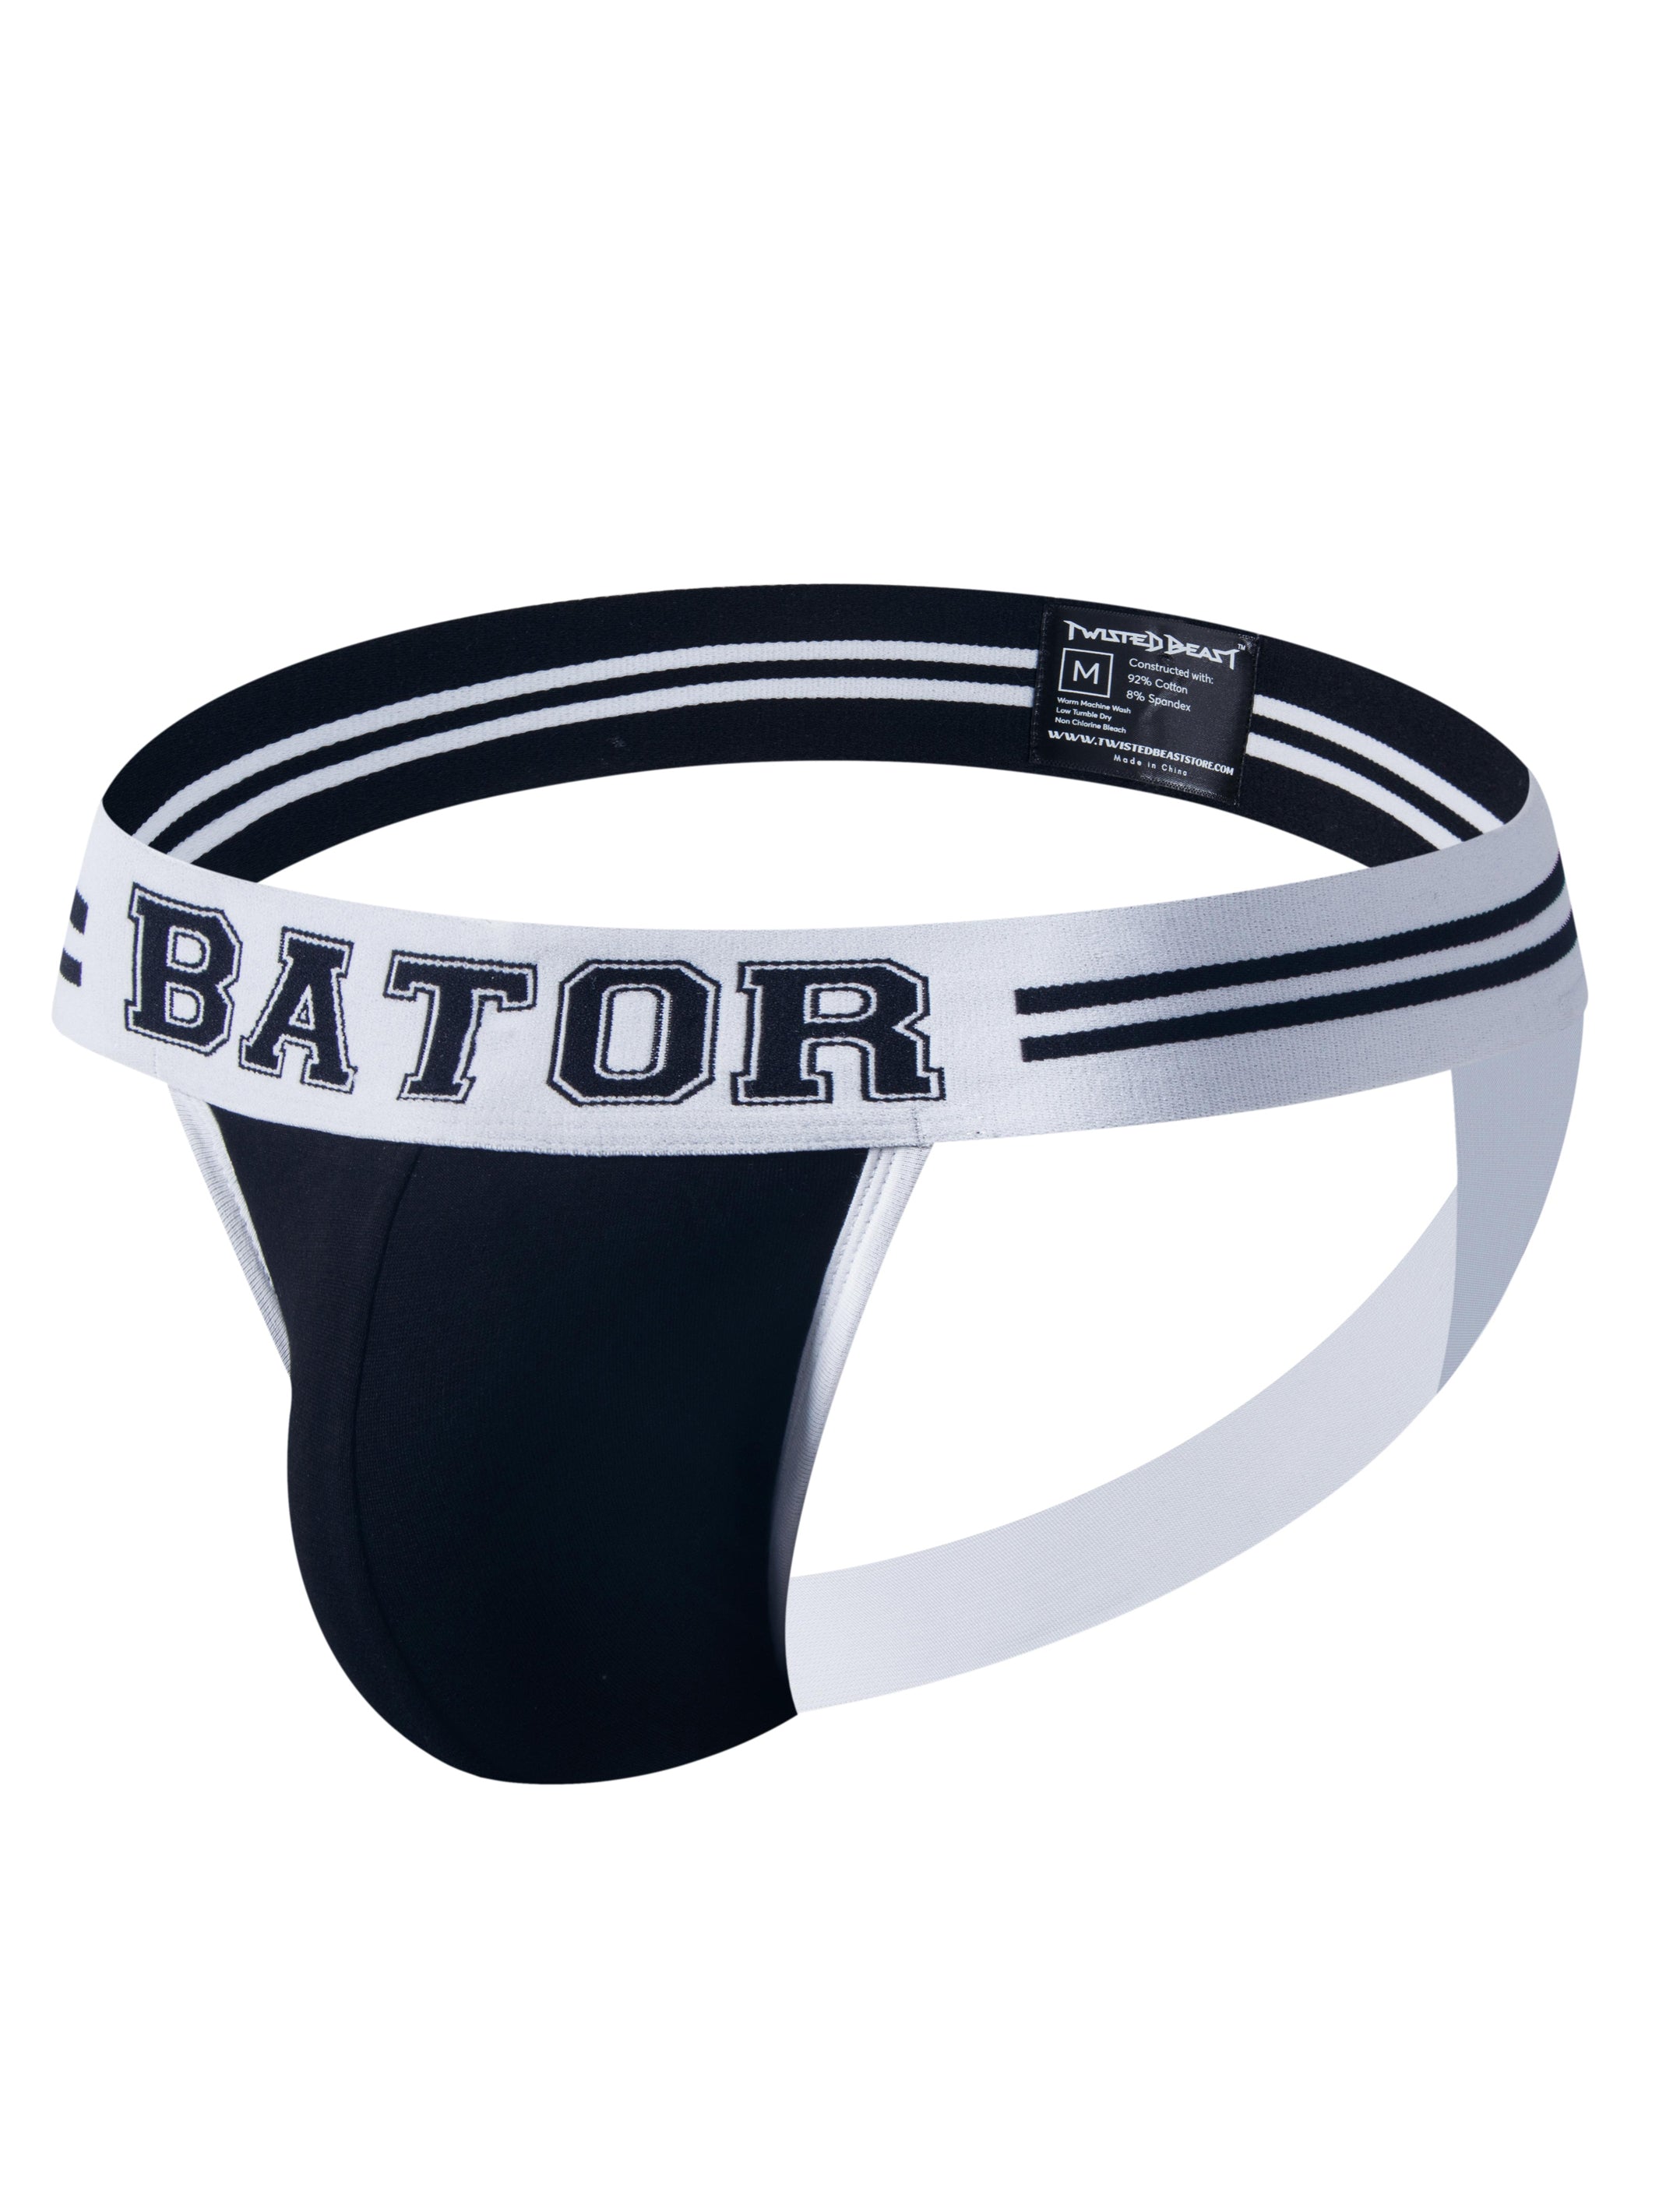 A product photo of a black Bator Jock taken from the side.